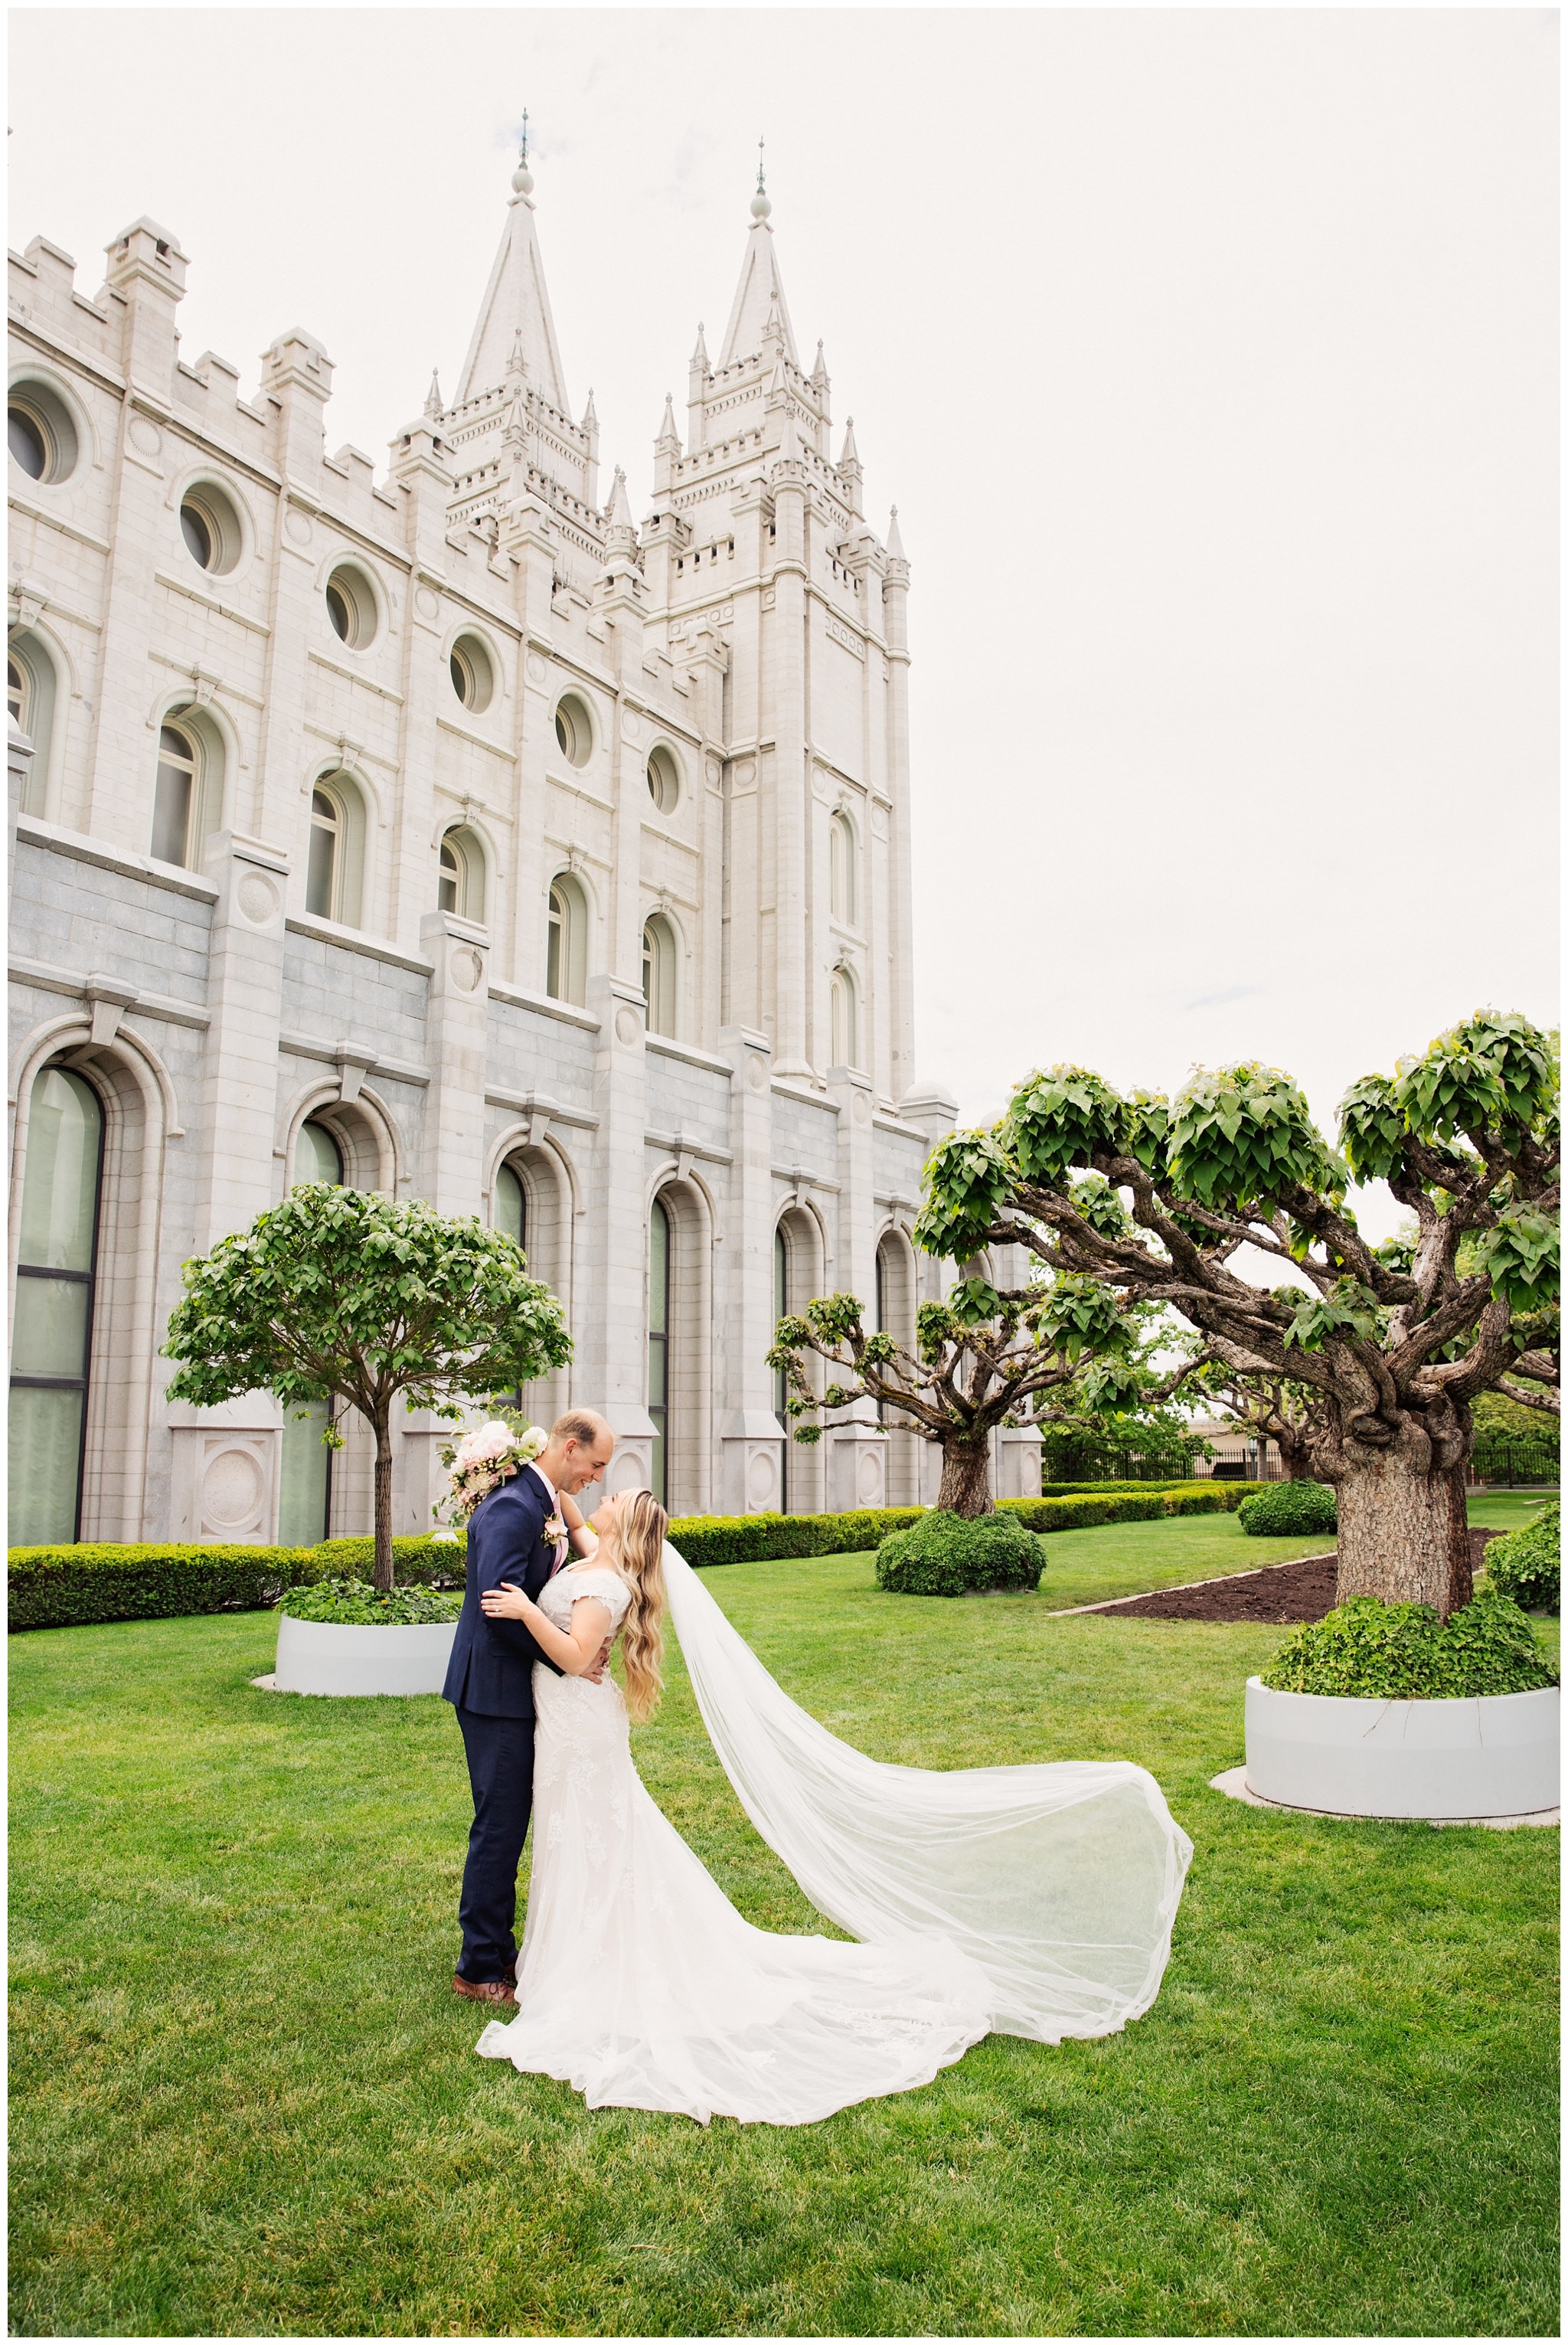 Salt Lake City Temple bridals in the summer